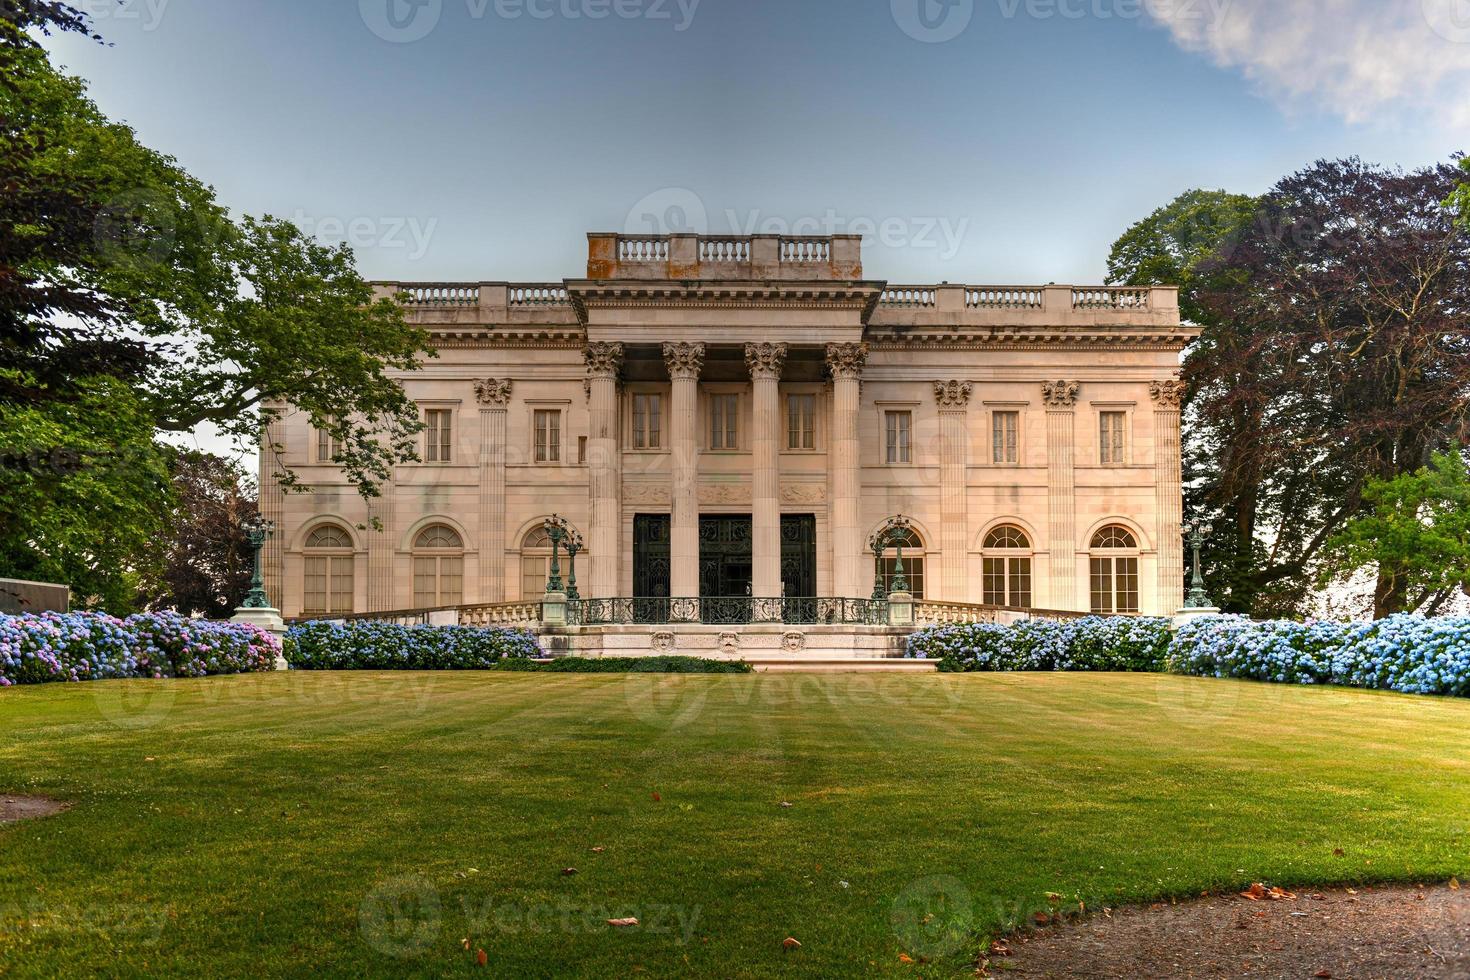 The Marble House in Newport, Rhode Island. It is a Gilded Age mansion and its temple-front portico is like that of the White House. photo